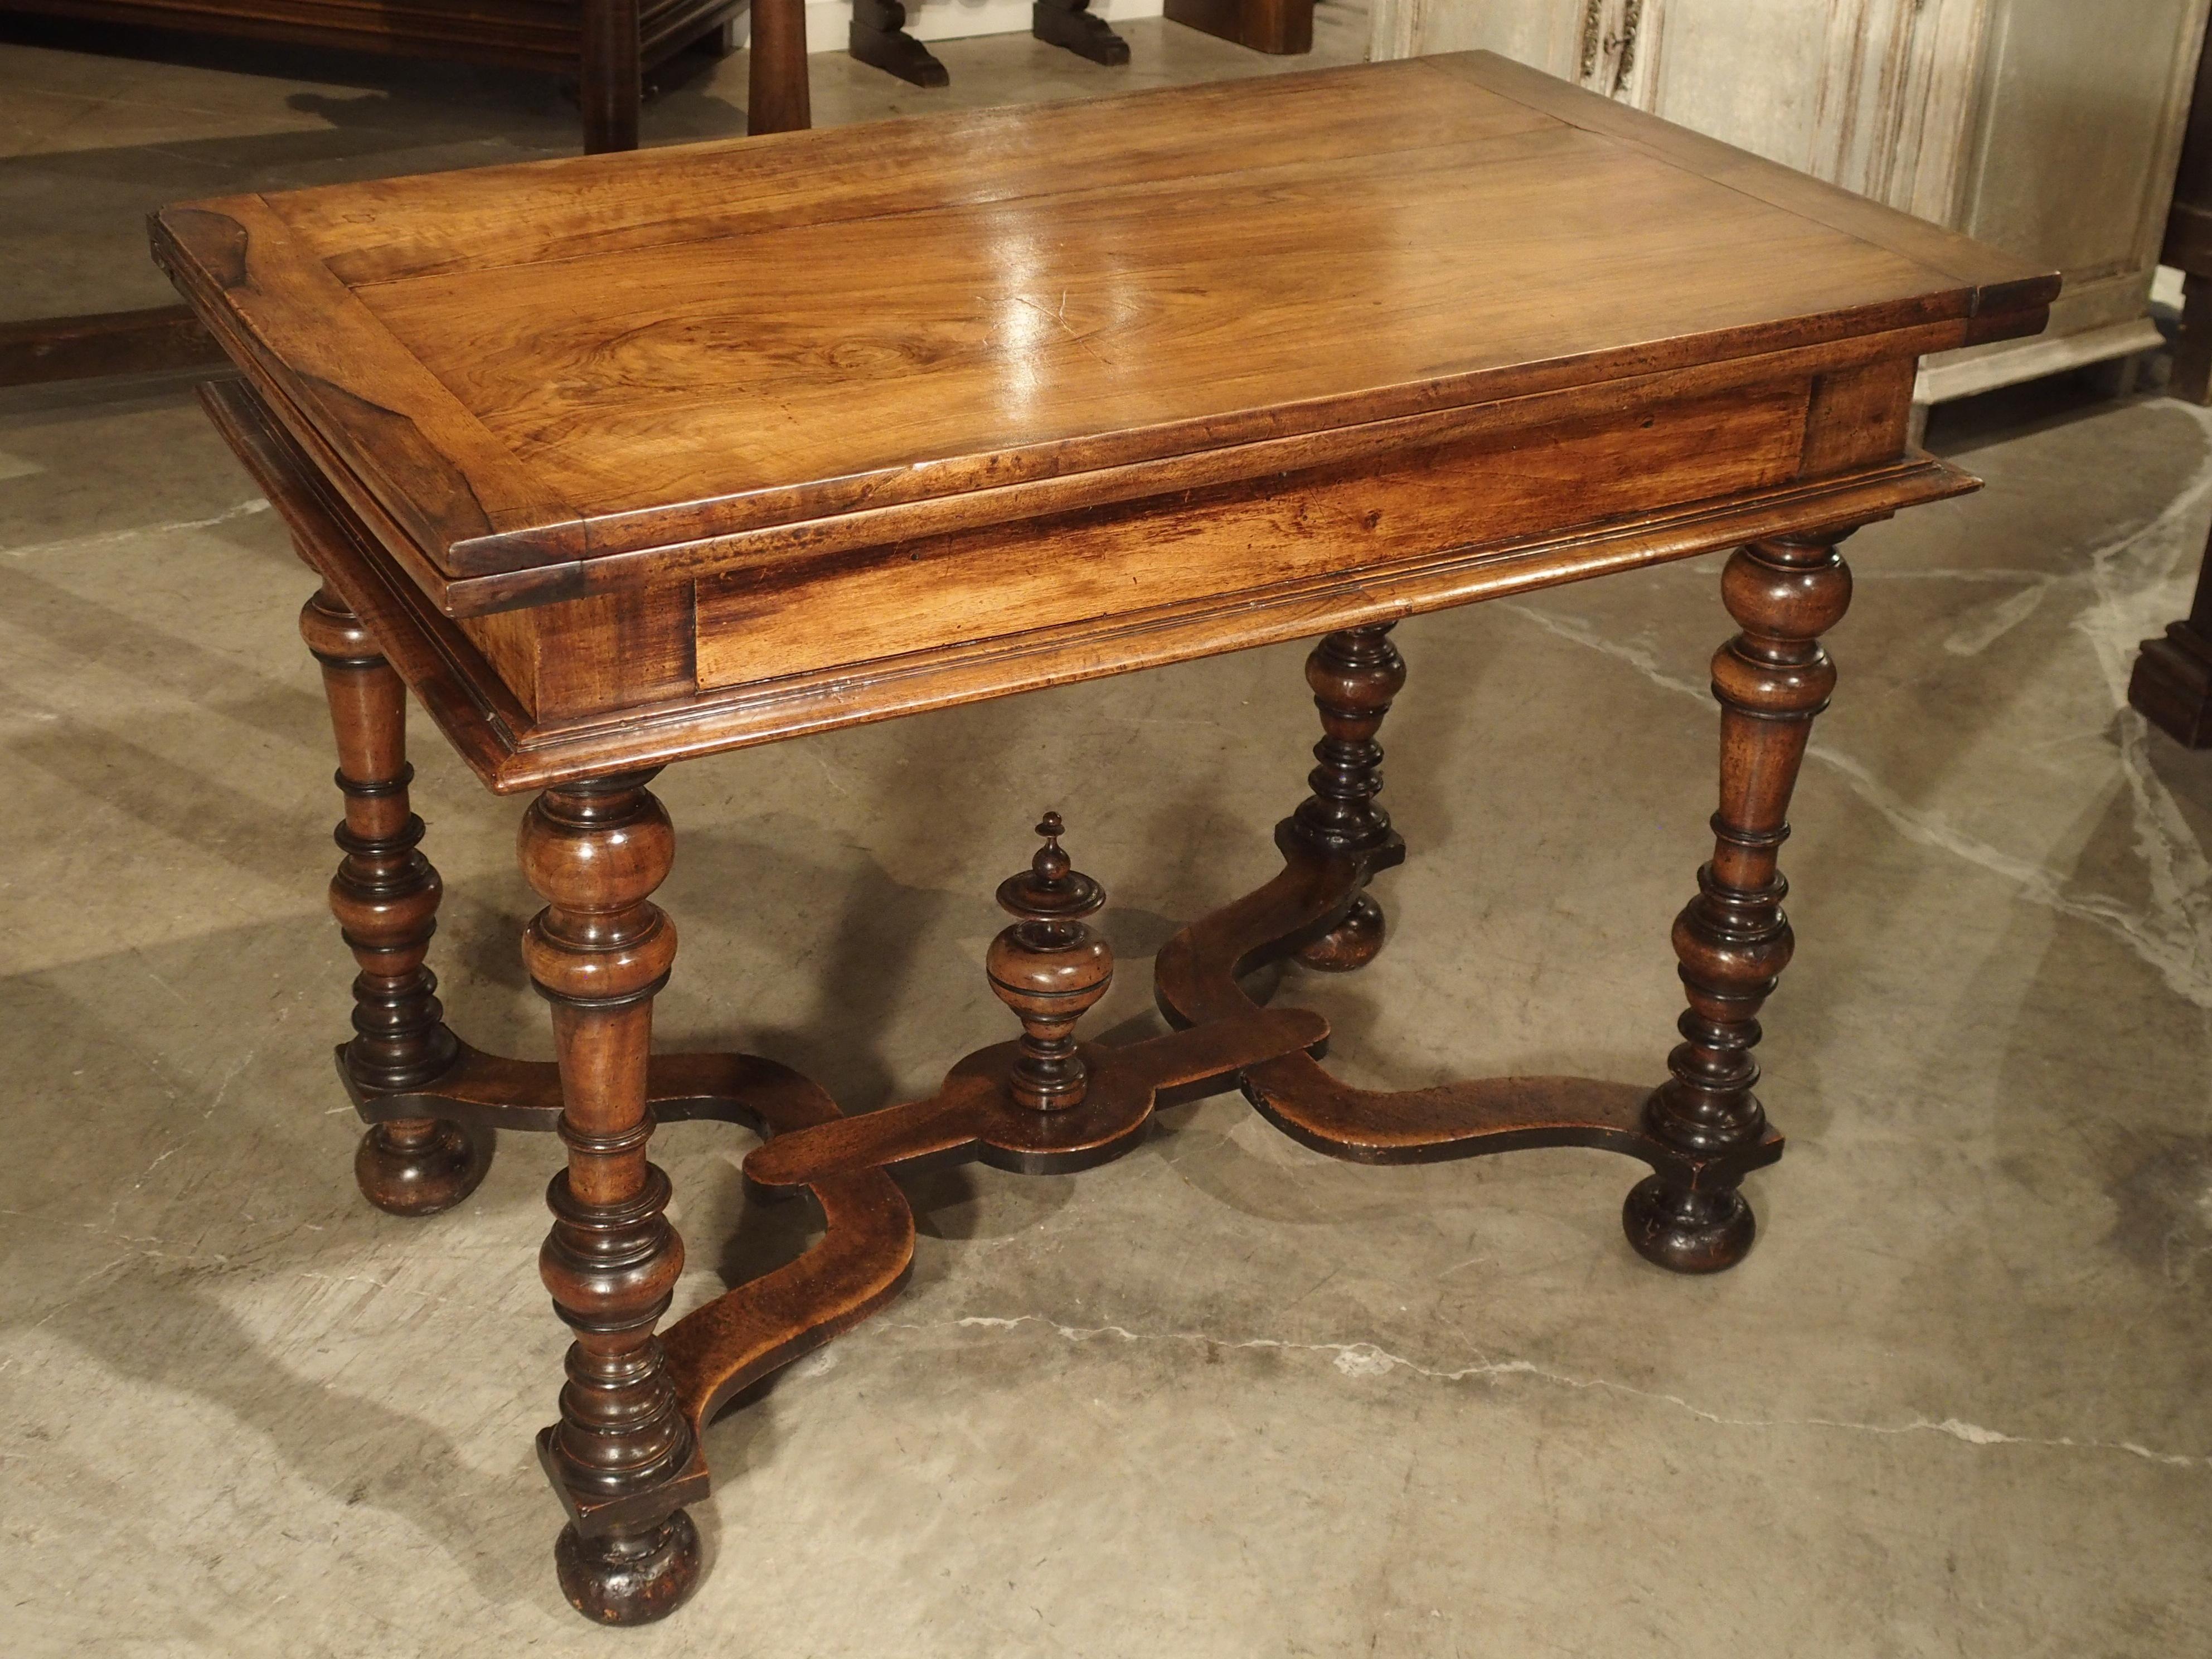 Hand-Carved 17th Century French Folding Top Walnut Wood Table